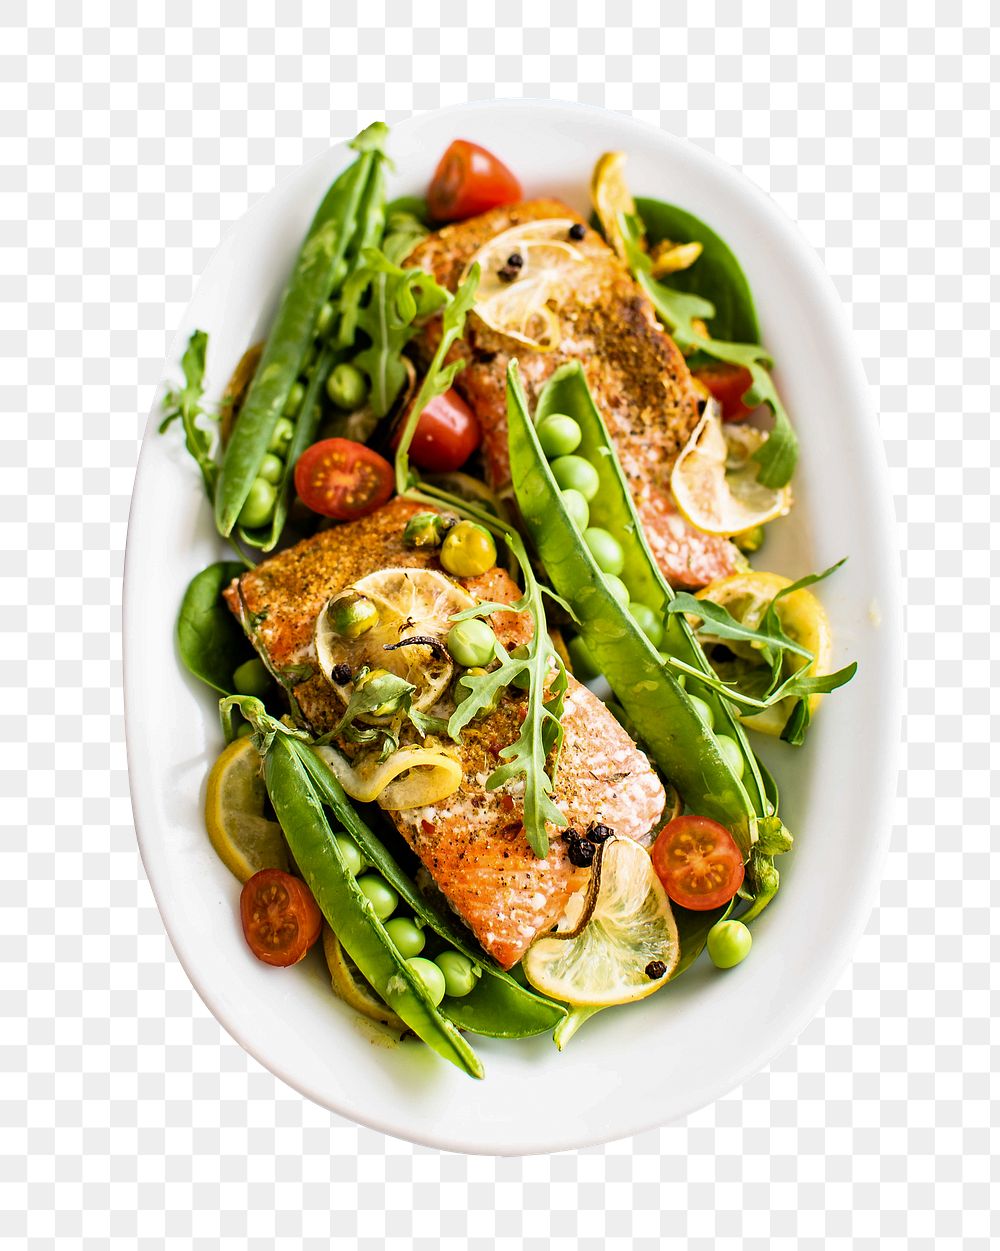 Grilled salmon with peas png sticker, food isolated image, transparent background